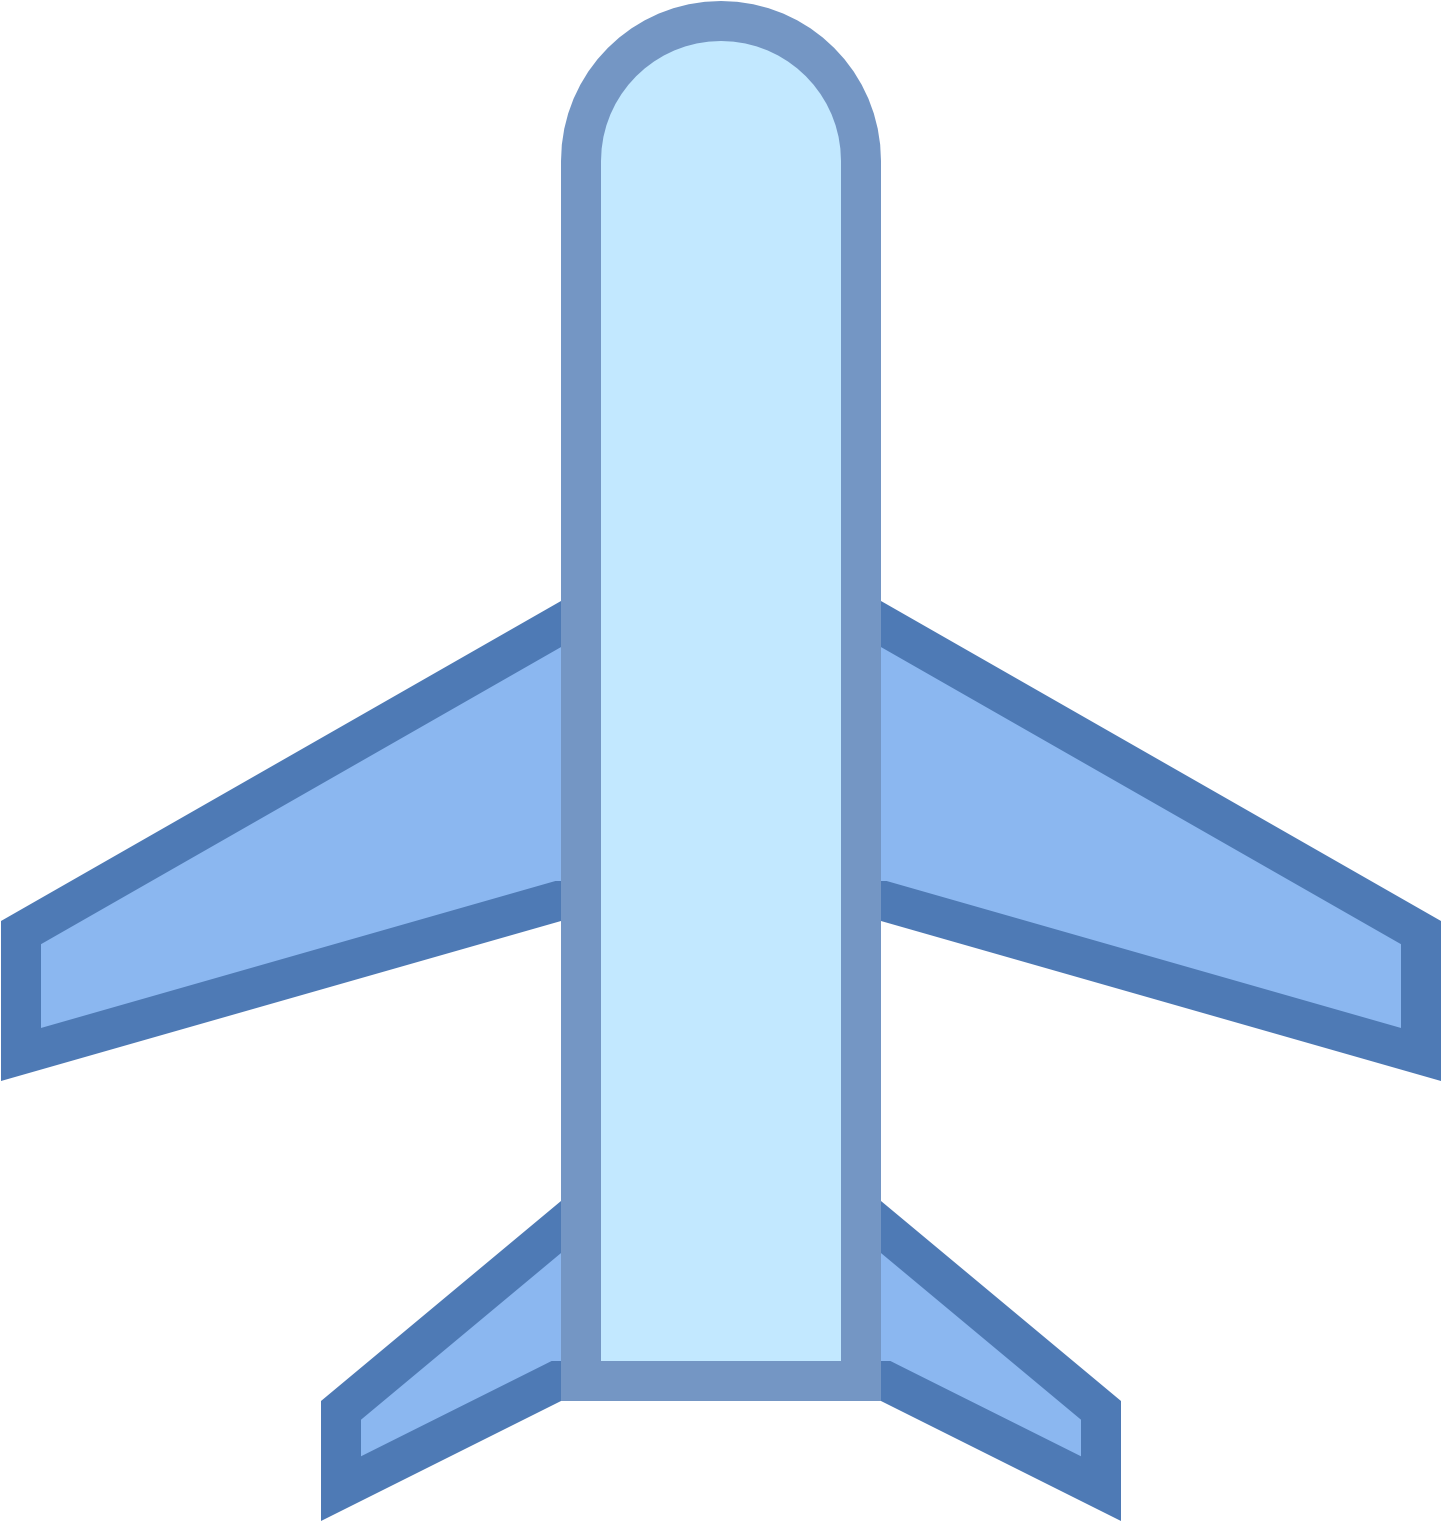 Top Down Airplane Graphic PNG image